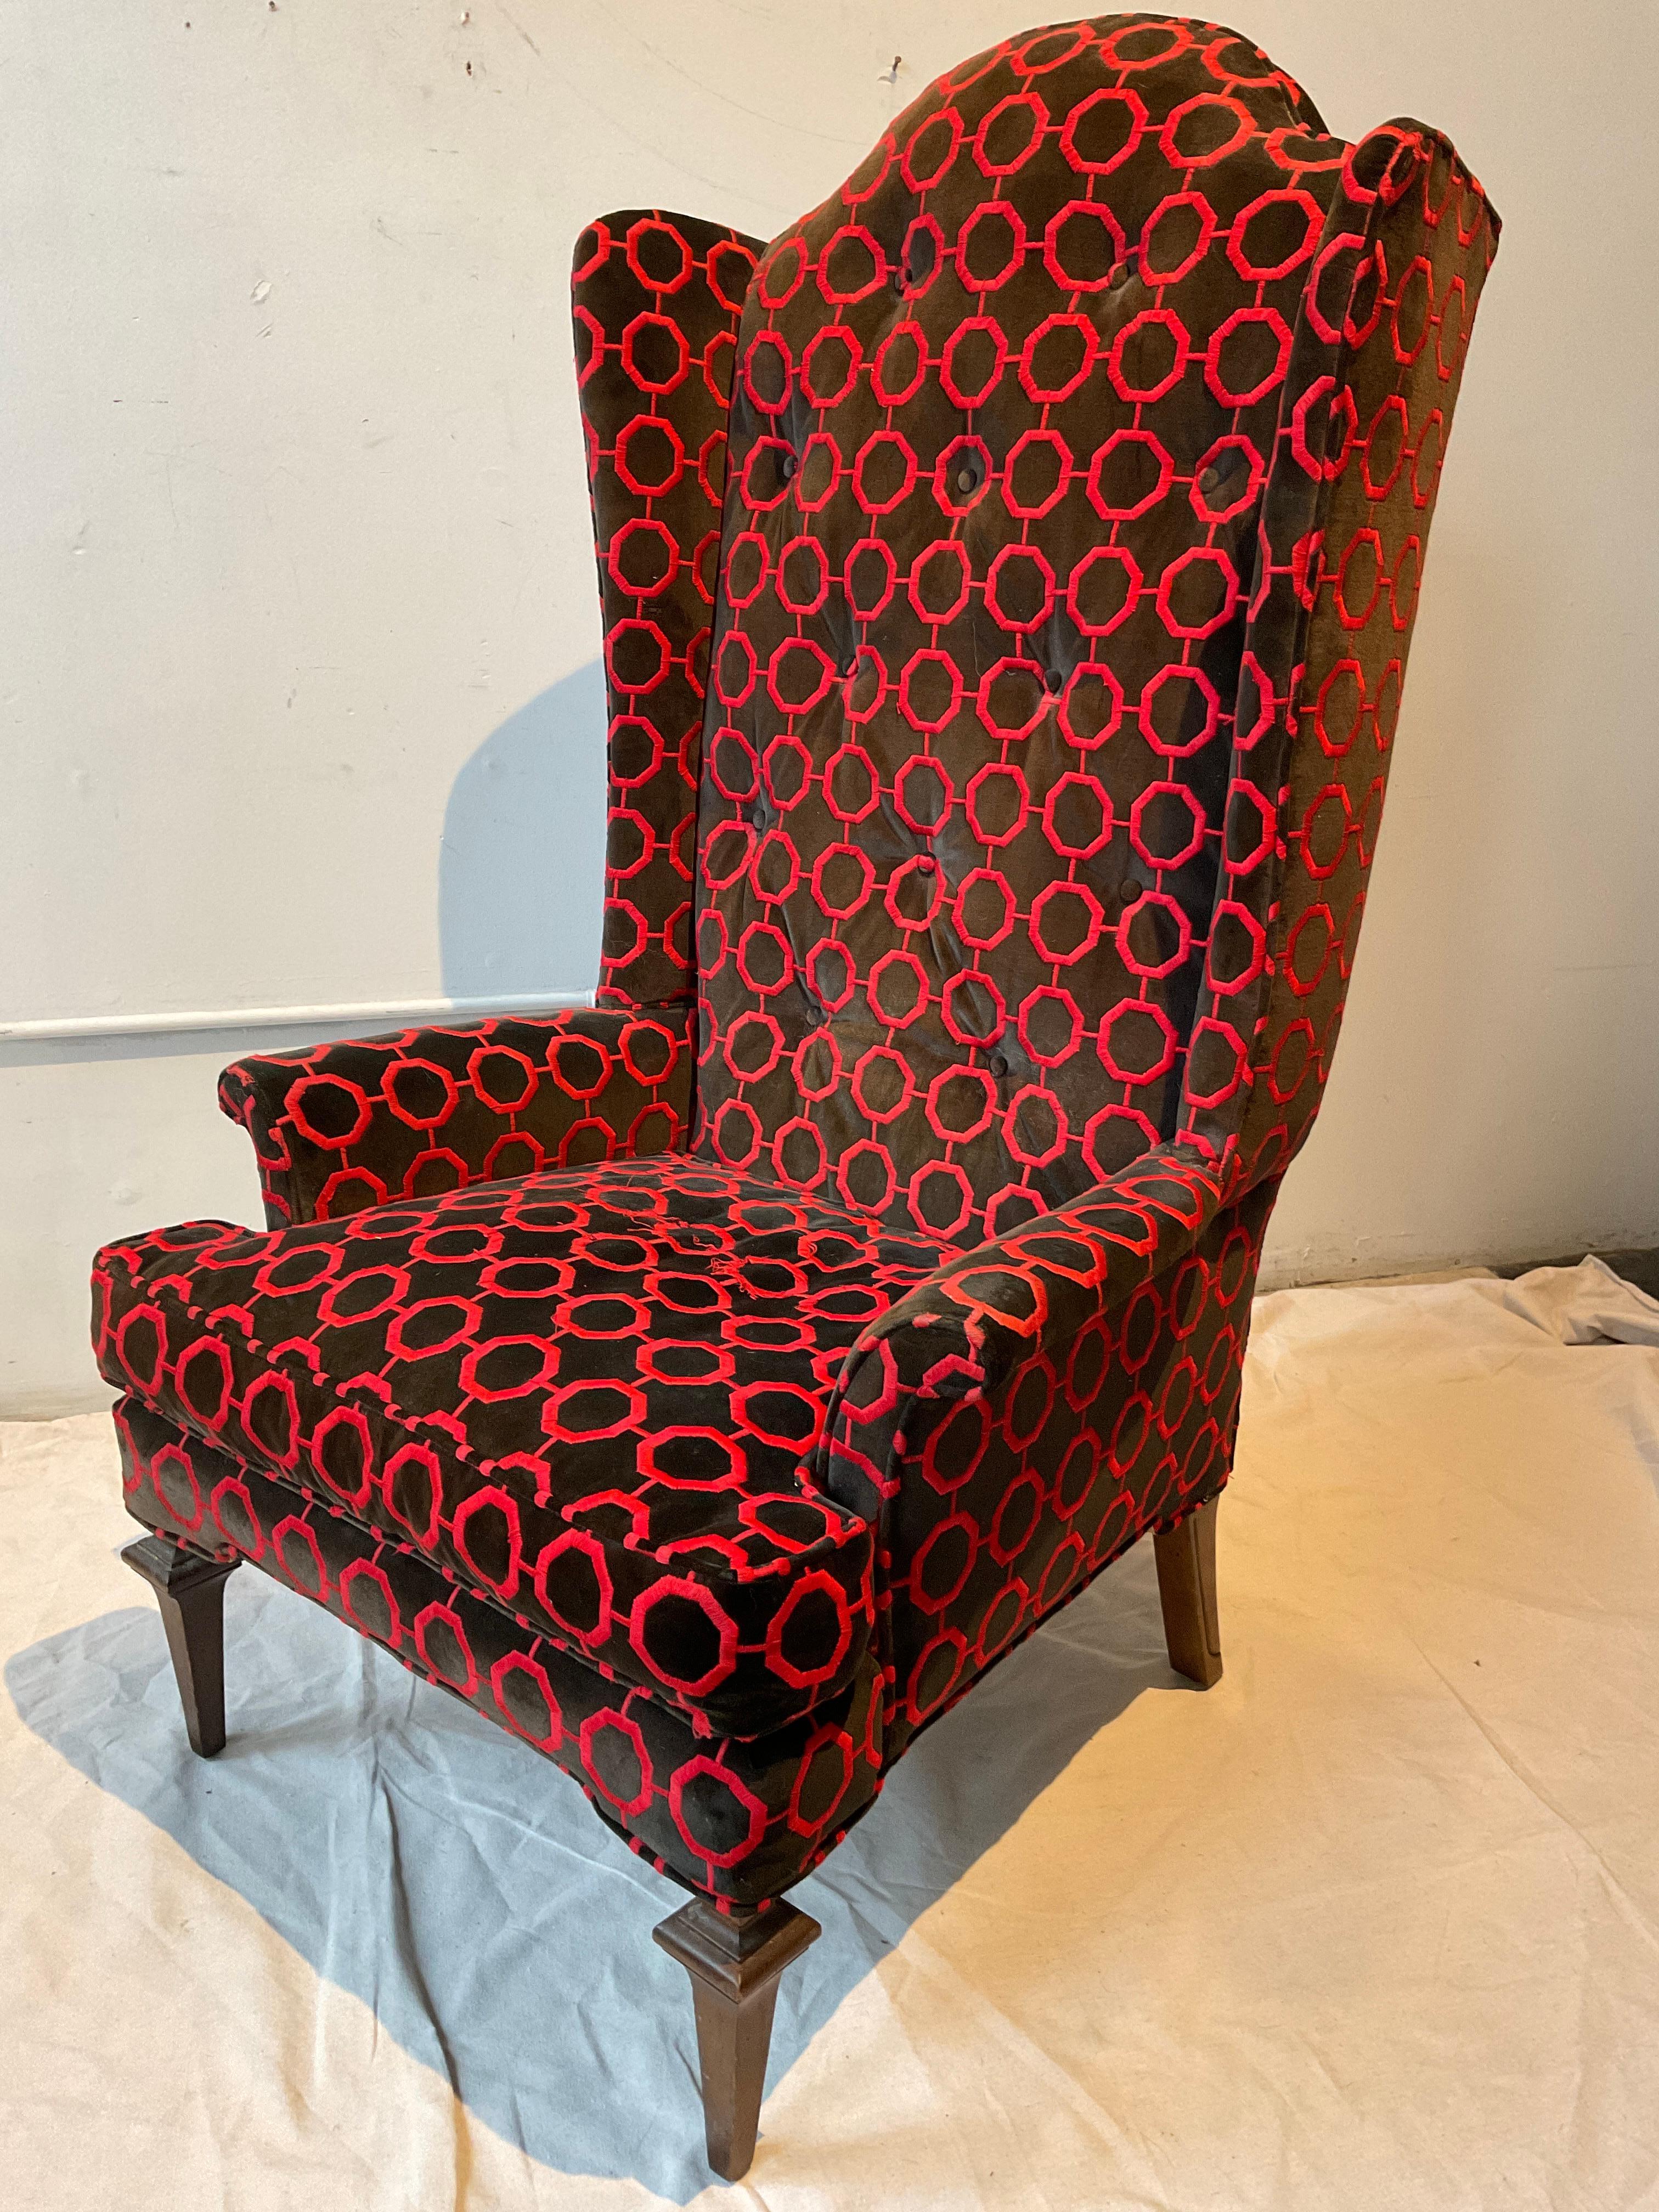 1970s Tall wingback chair by Tomlinson. Very chic, very Kelly Wearstler. Needs reupholstering.